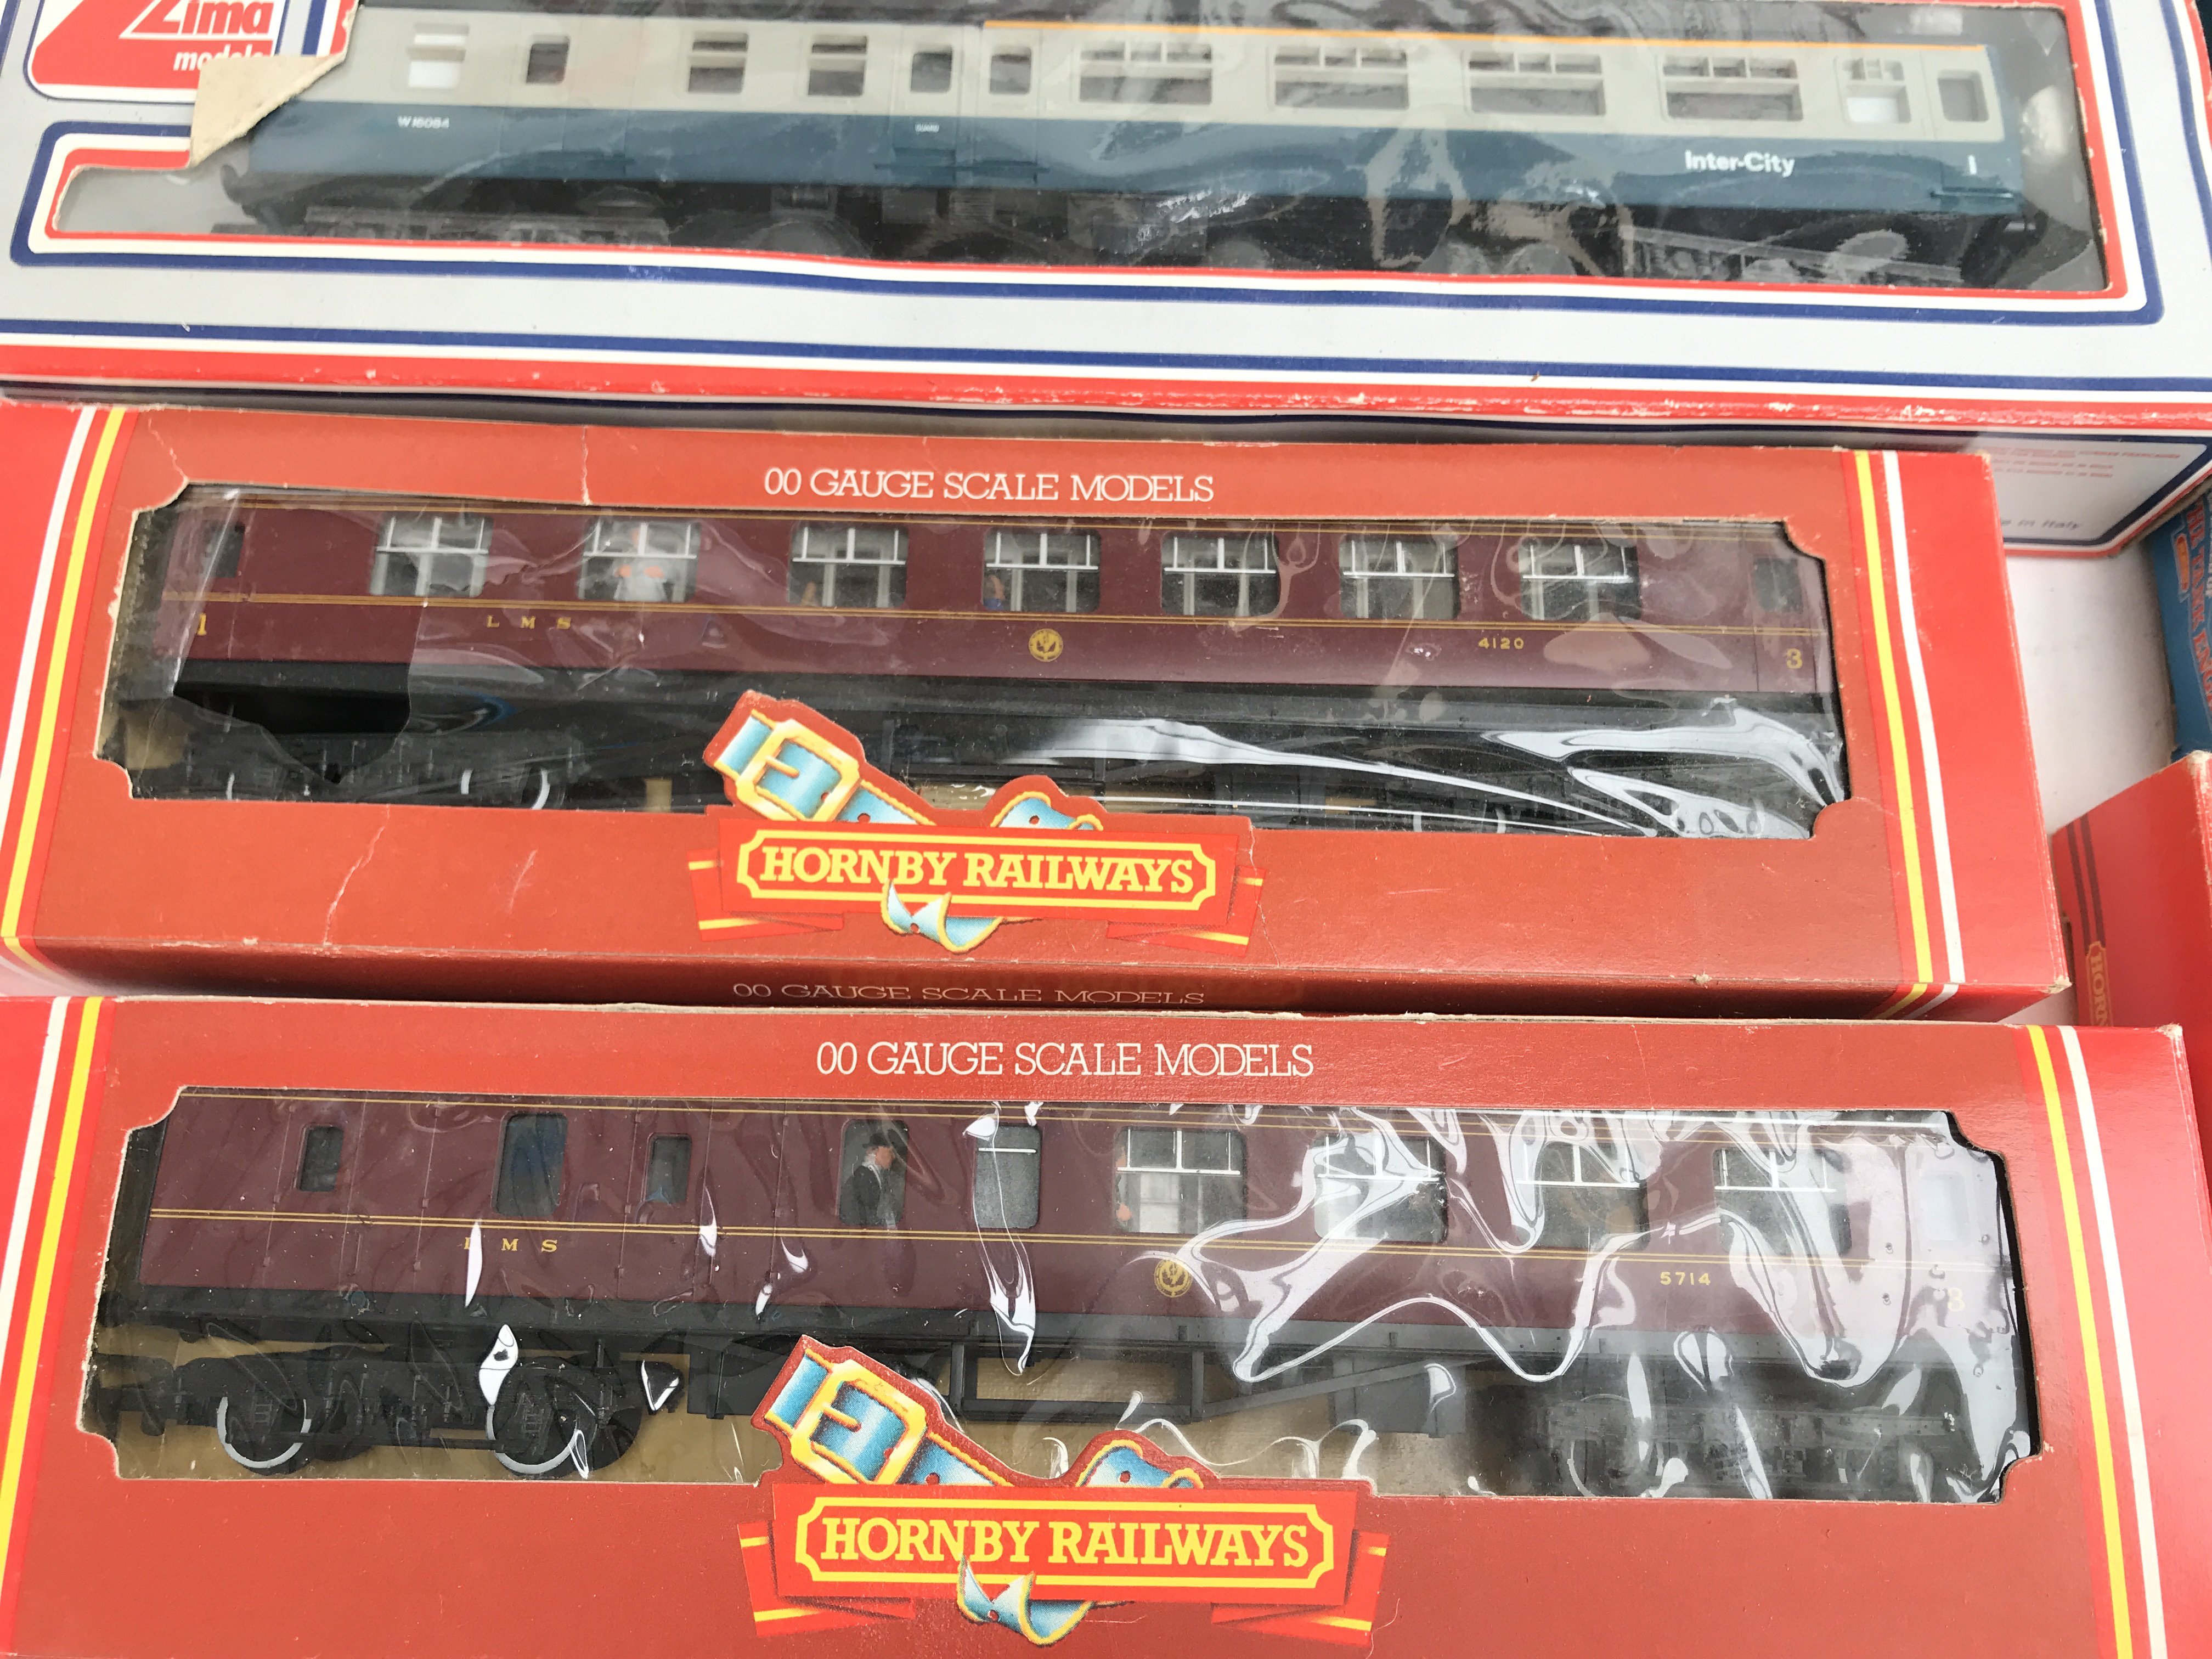 A Collection of 00 Gauge Boxed Locomotives and Coa - Image 4 of 5